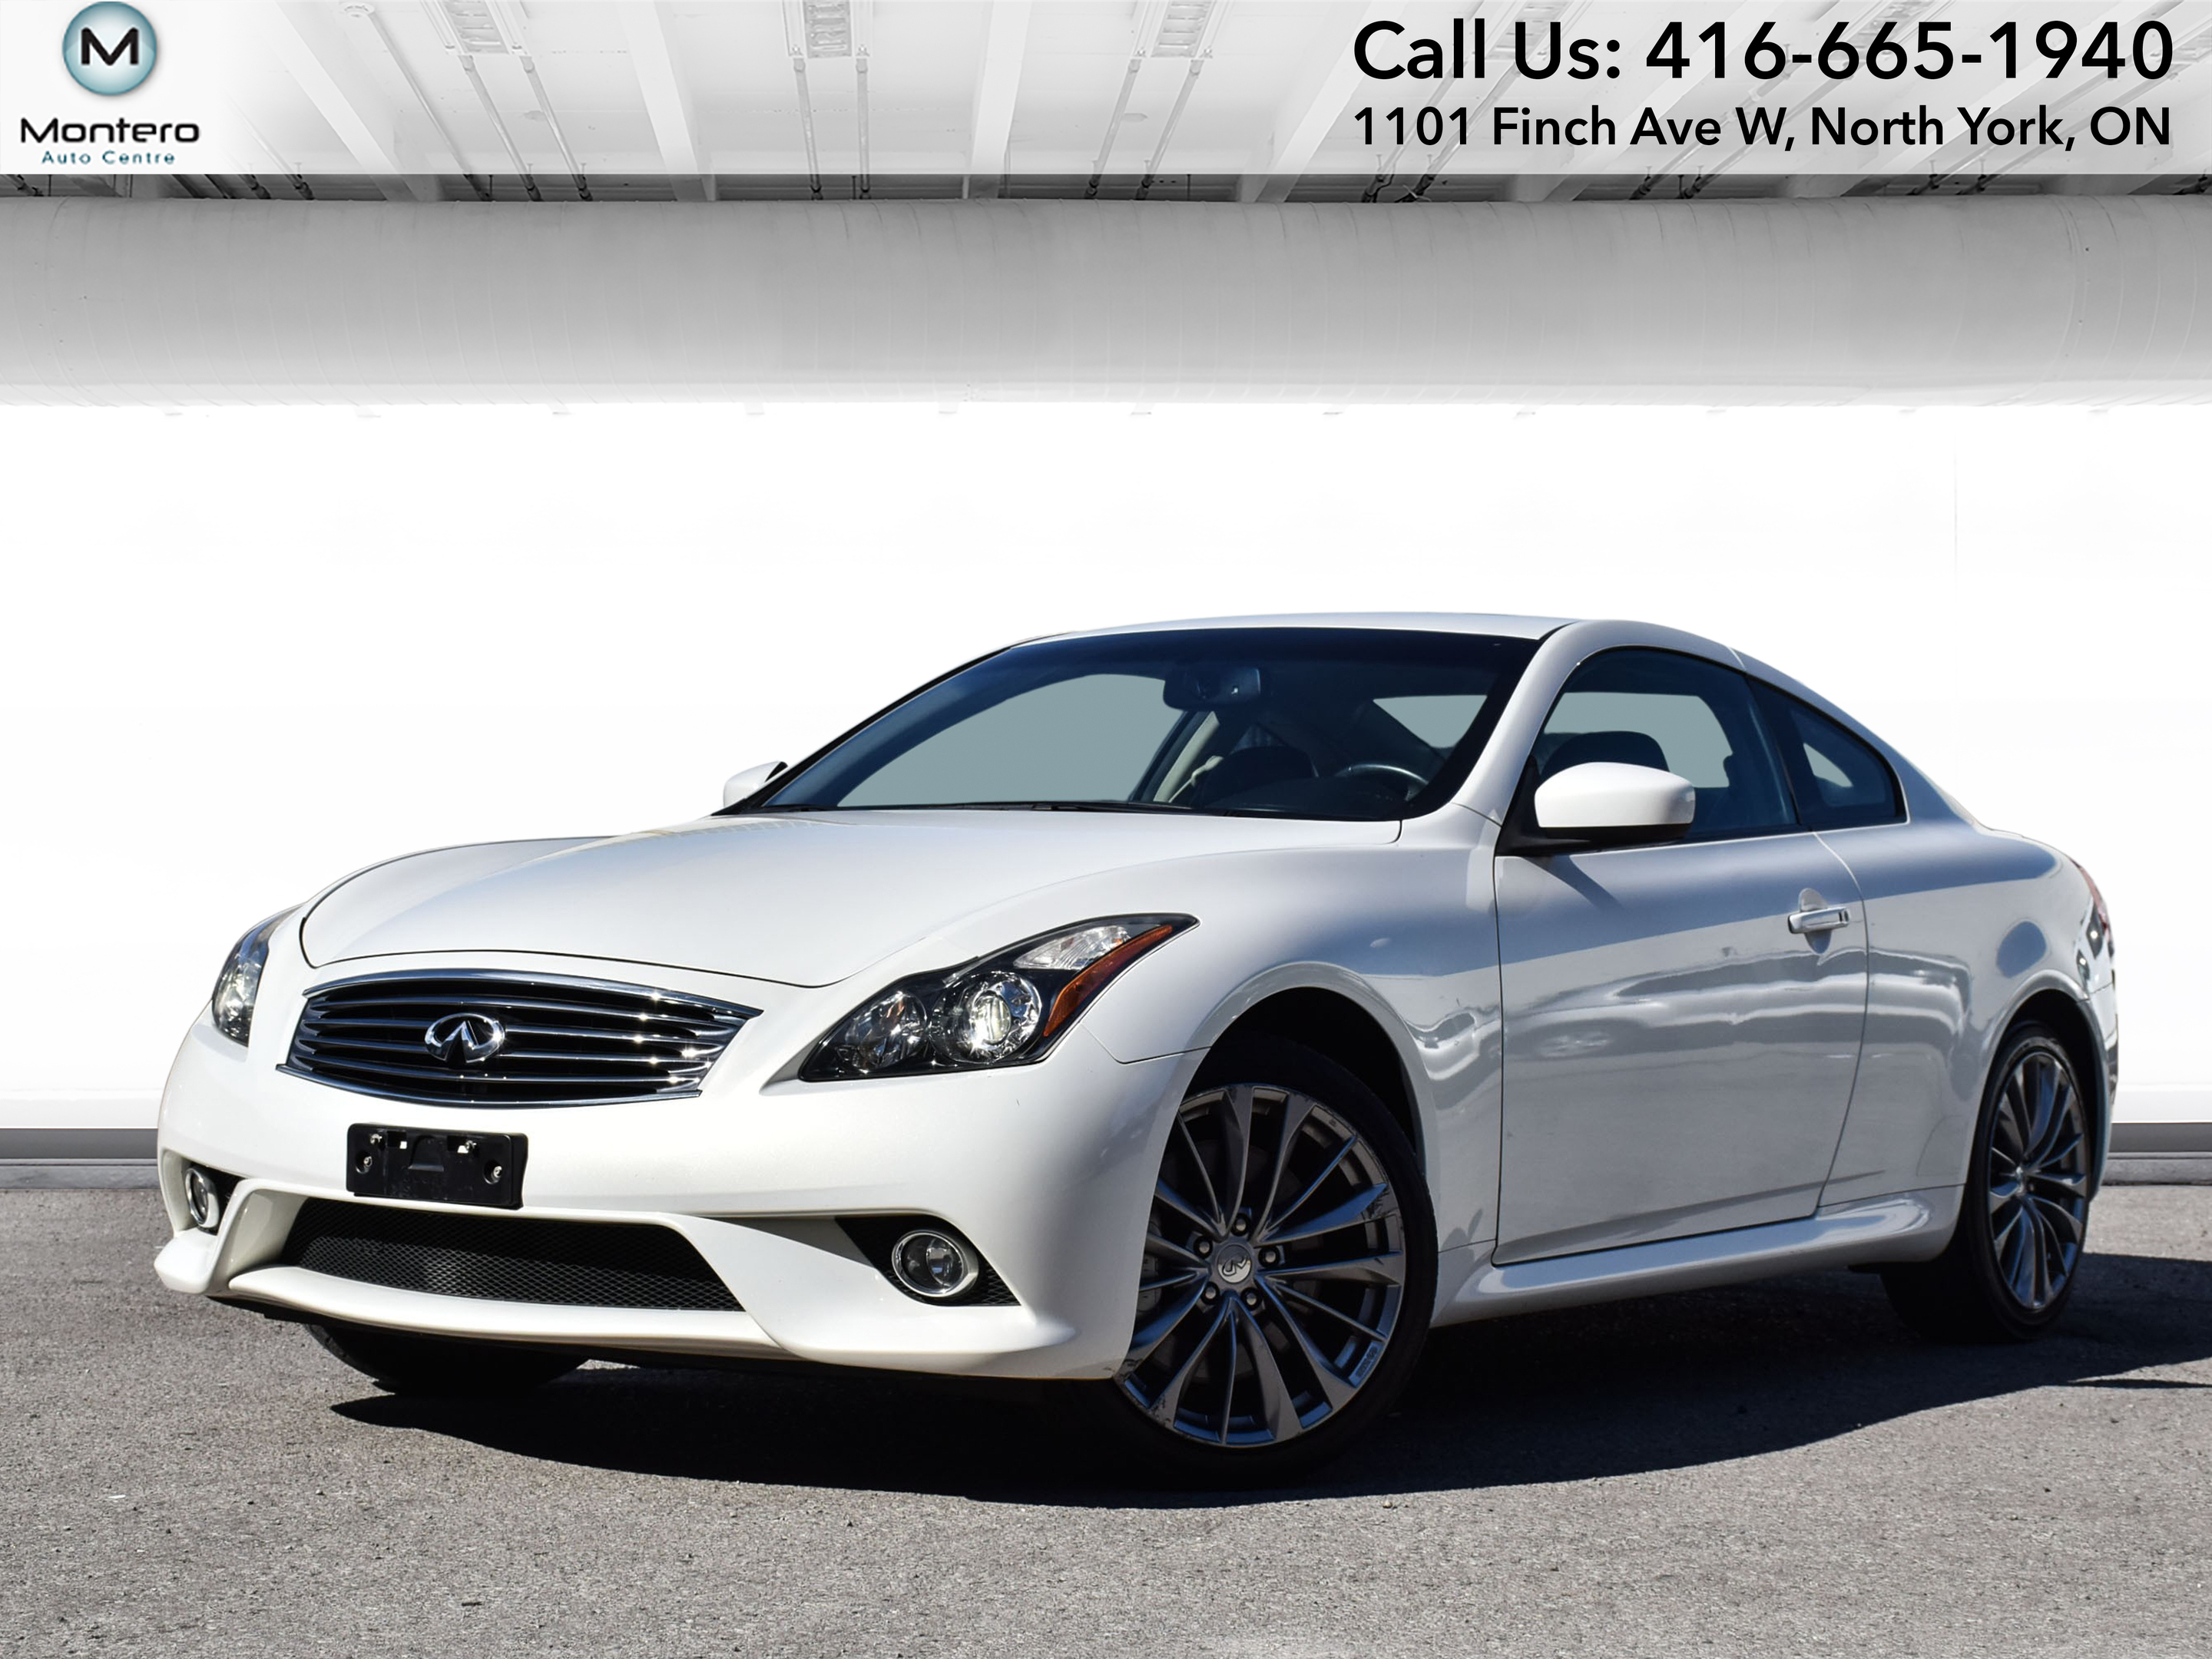 2011 Infiniti G37 AWD VERY LOW MILEAGE EXCELLENT SHOWROOM CONDITION 